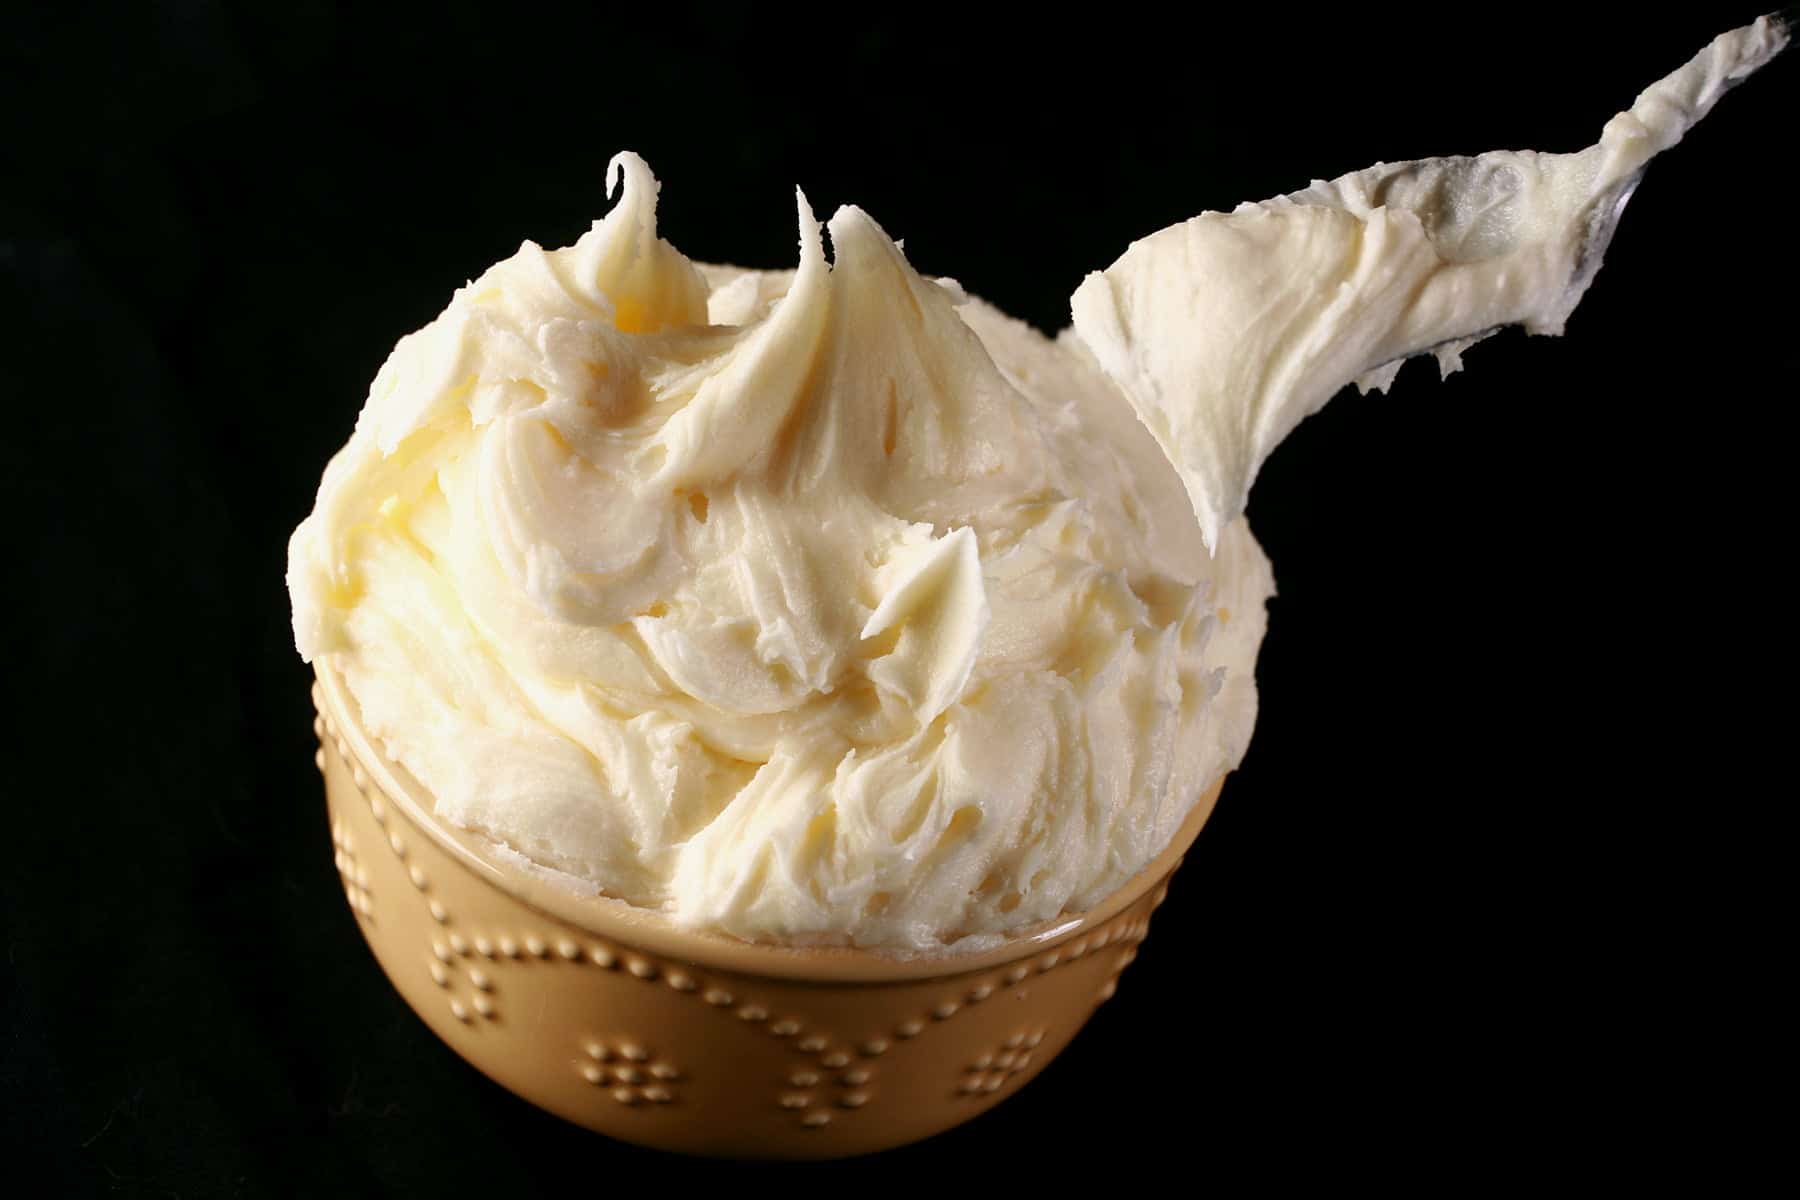 A bowl full of - and mounded high with - off white American Buttercream is shown in front of a black background.